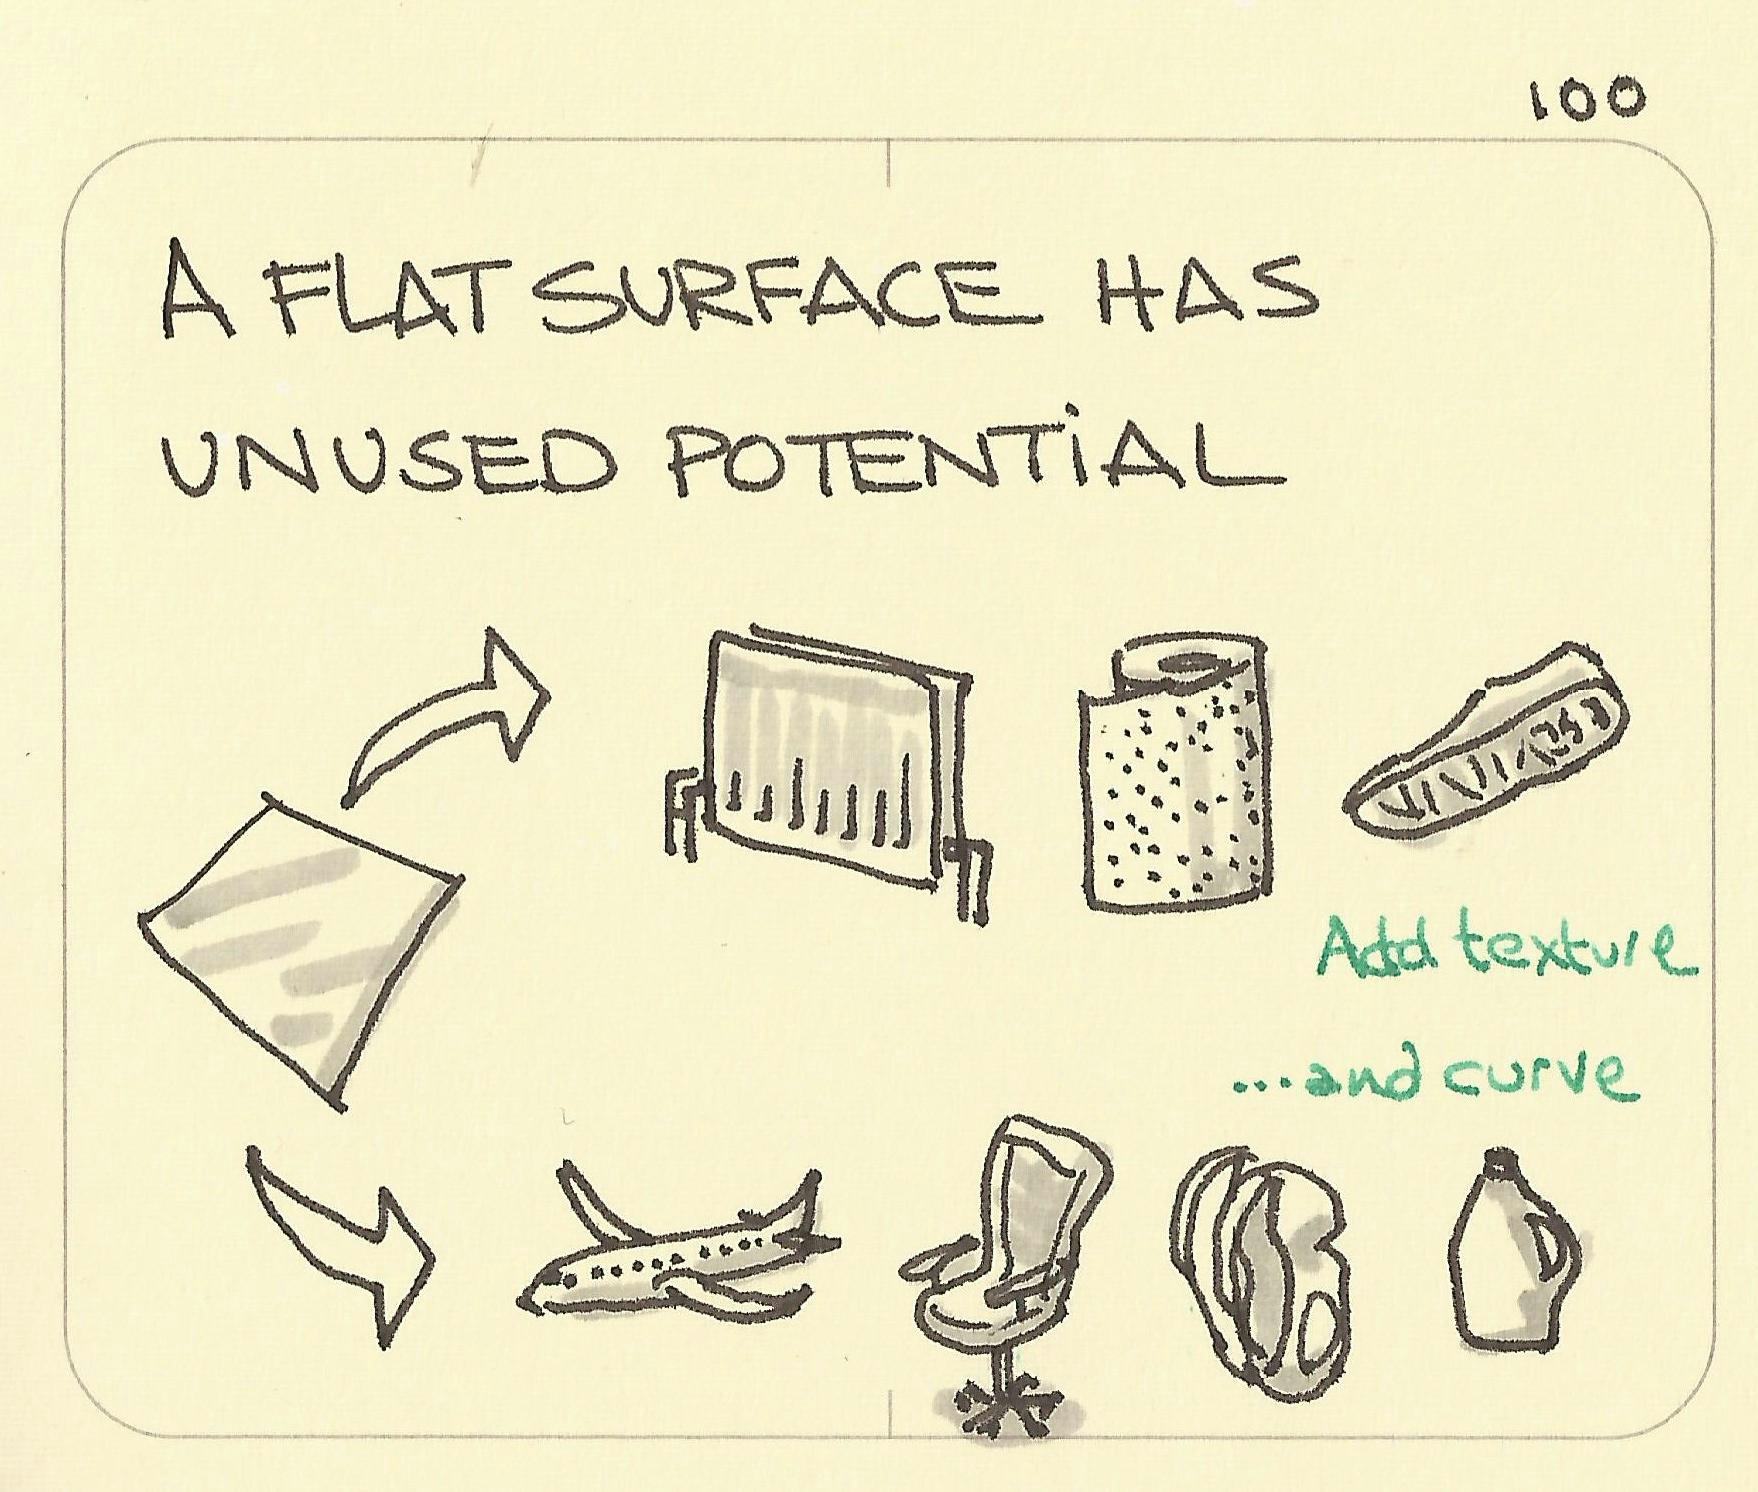 A flat surface has unused potential - Sketchplanations